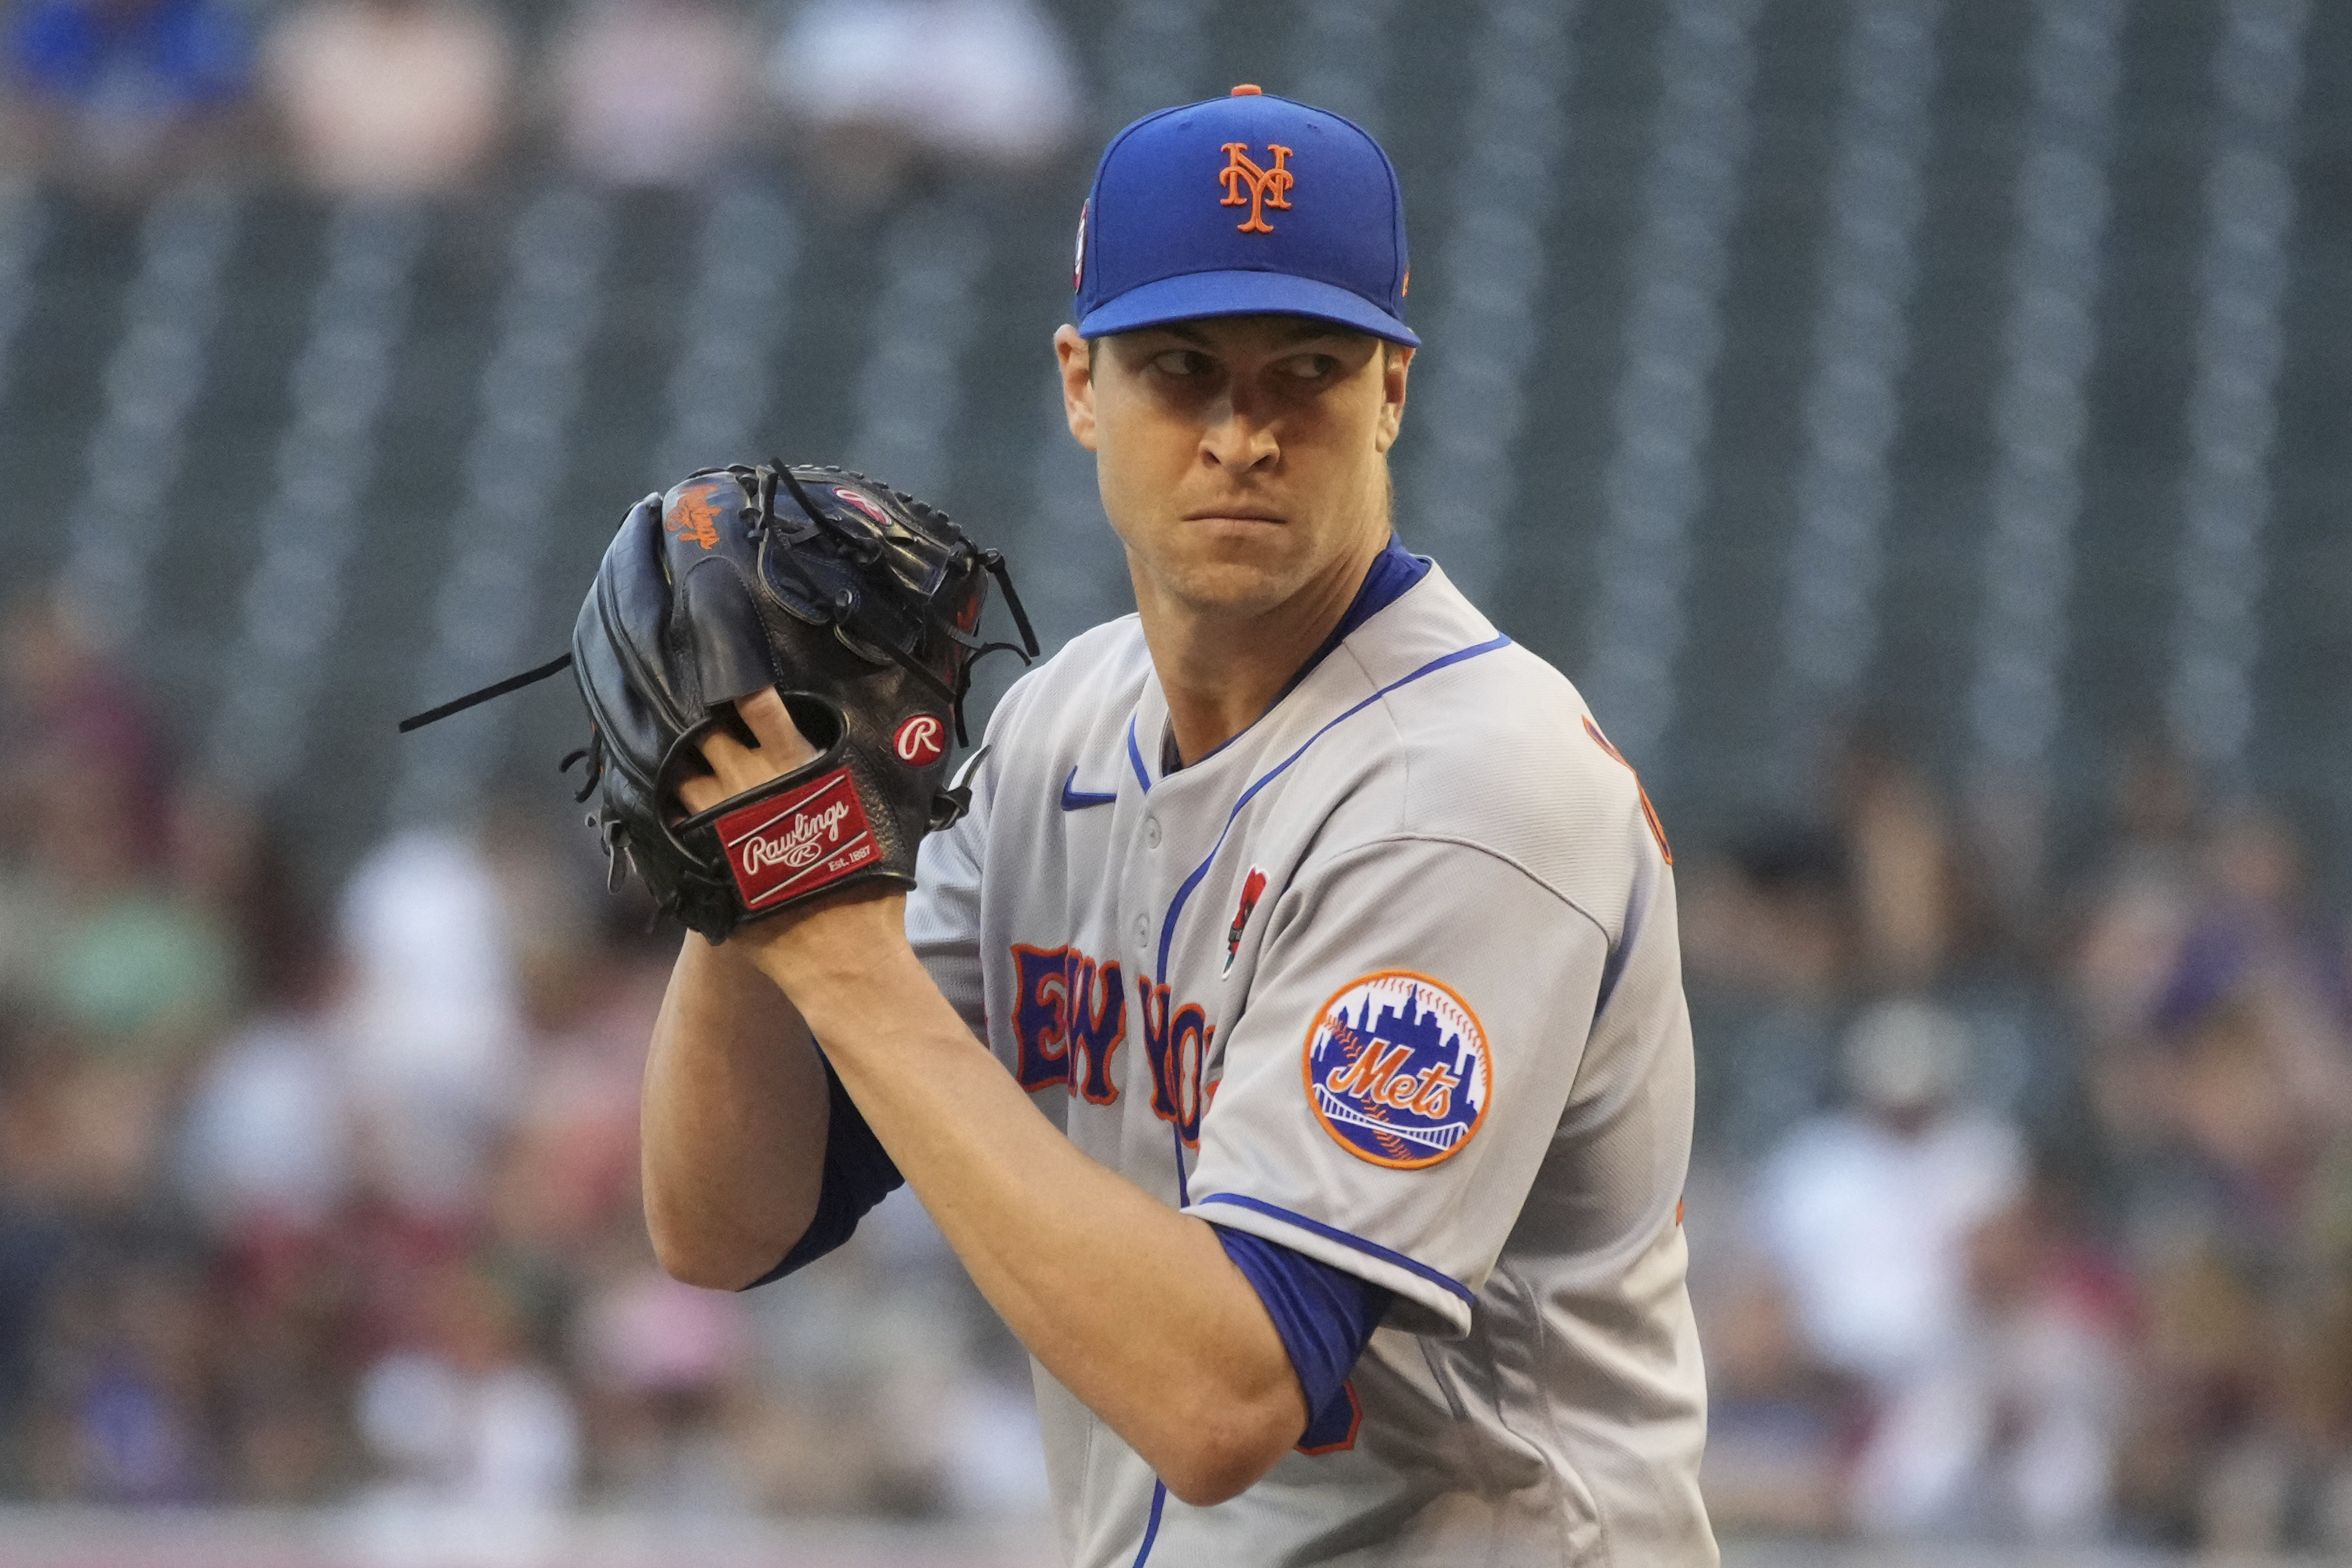 NY Mets must win now with Jacob deGrom still in his prime